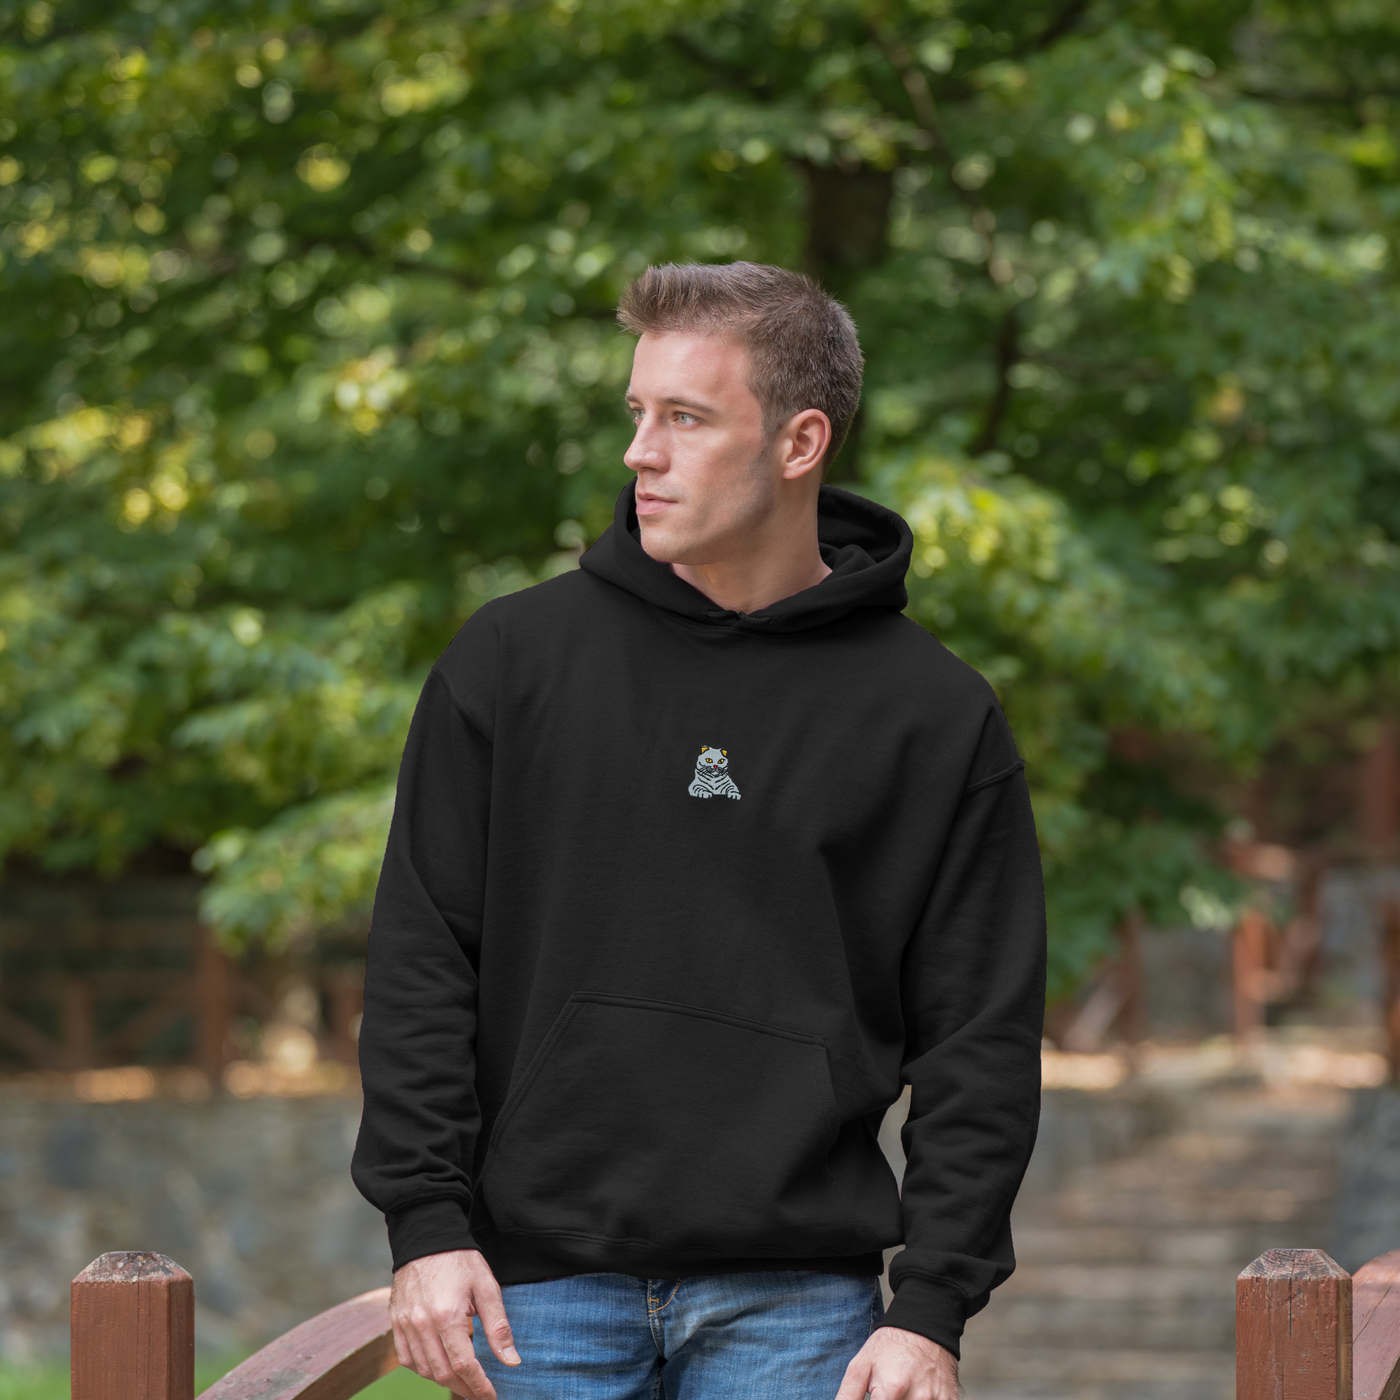 Bobby's Planet Men's Embroidered Scottish Fold Hoodie from Paws Dog Cat Animals Collection in Black Color#color_black